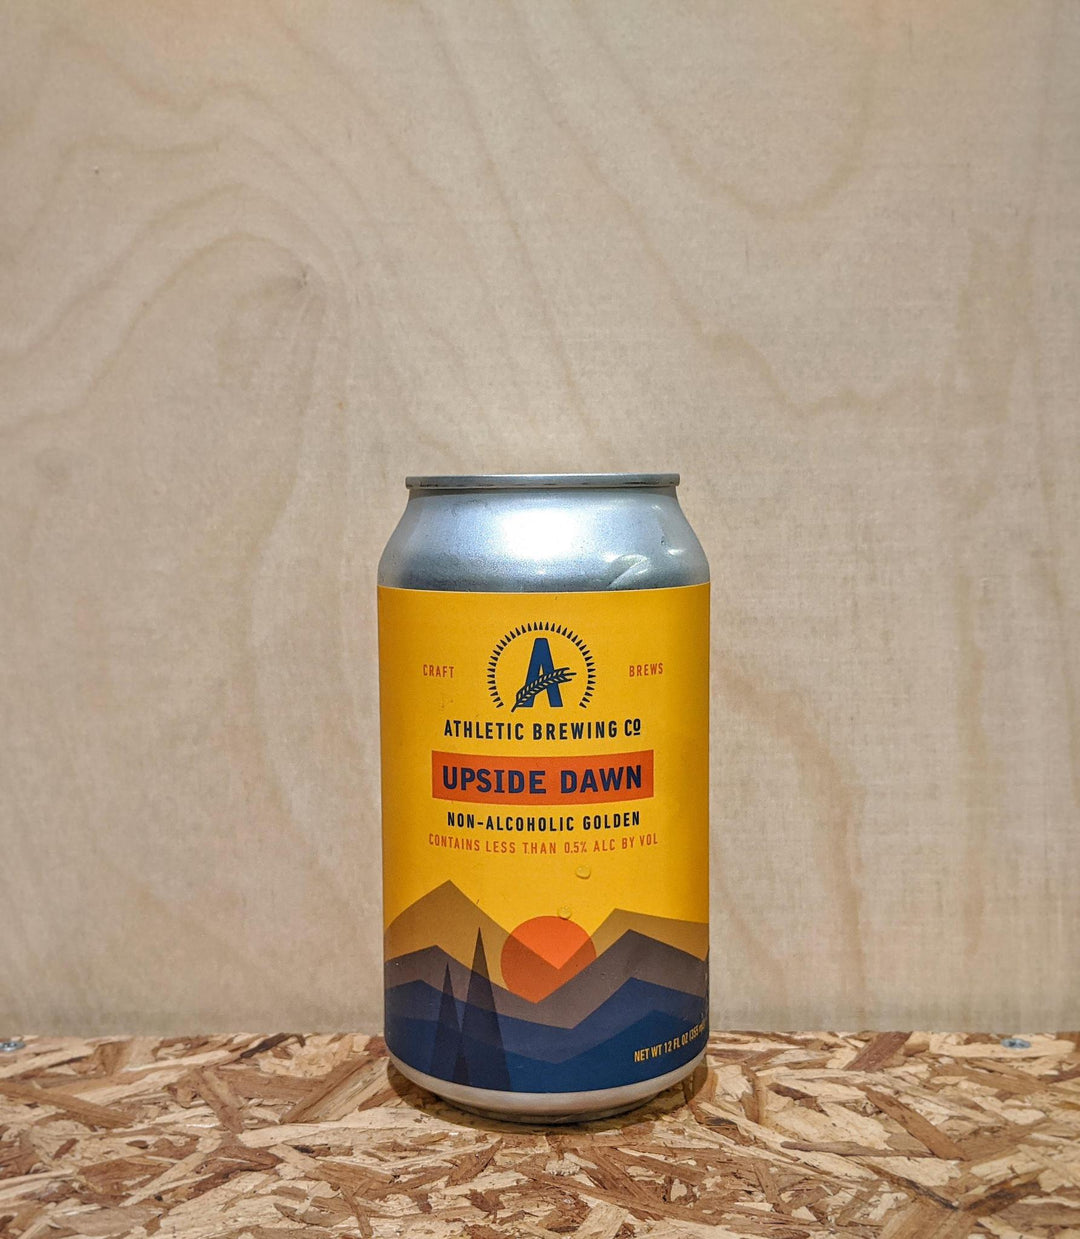 Athletic Brewing 'Upside Dawn' Non-Alcoholic Golden Ale (Stratford, CT)